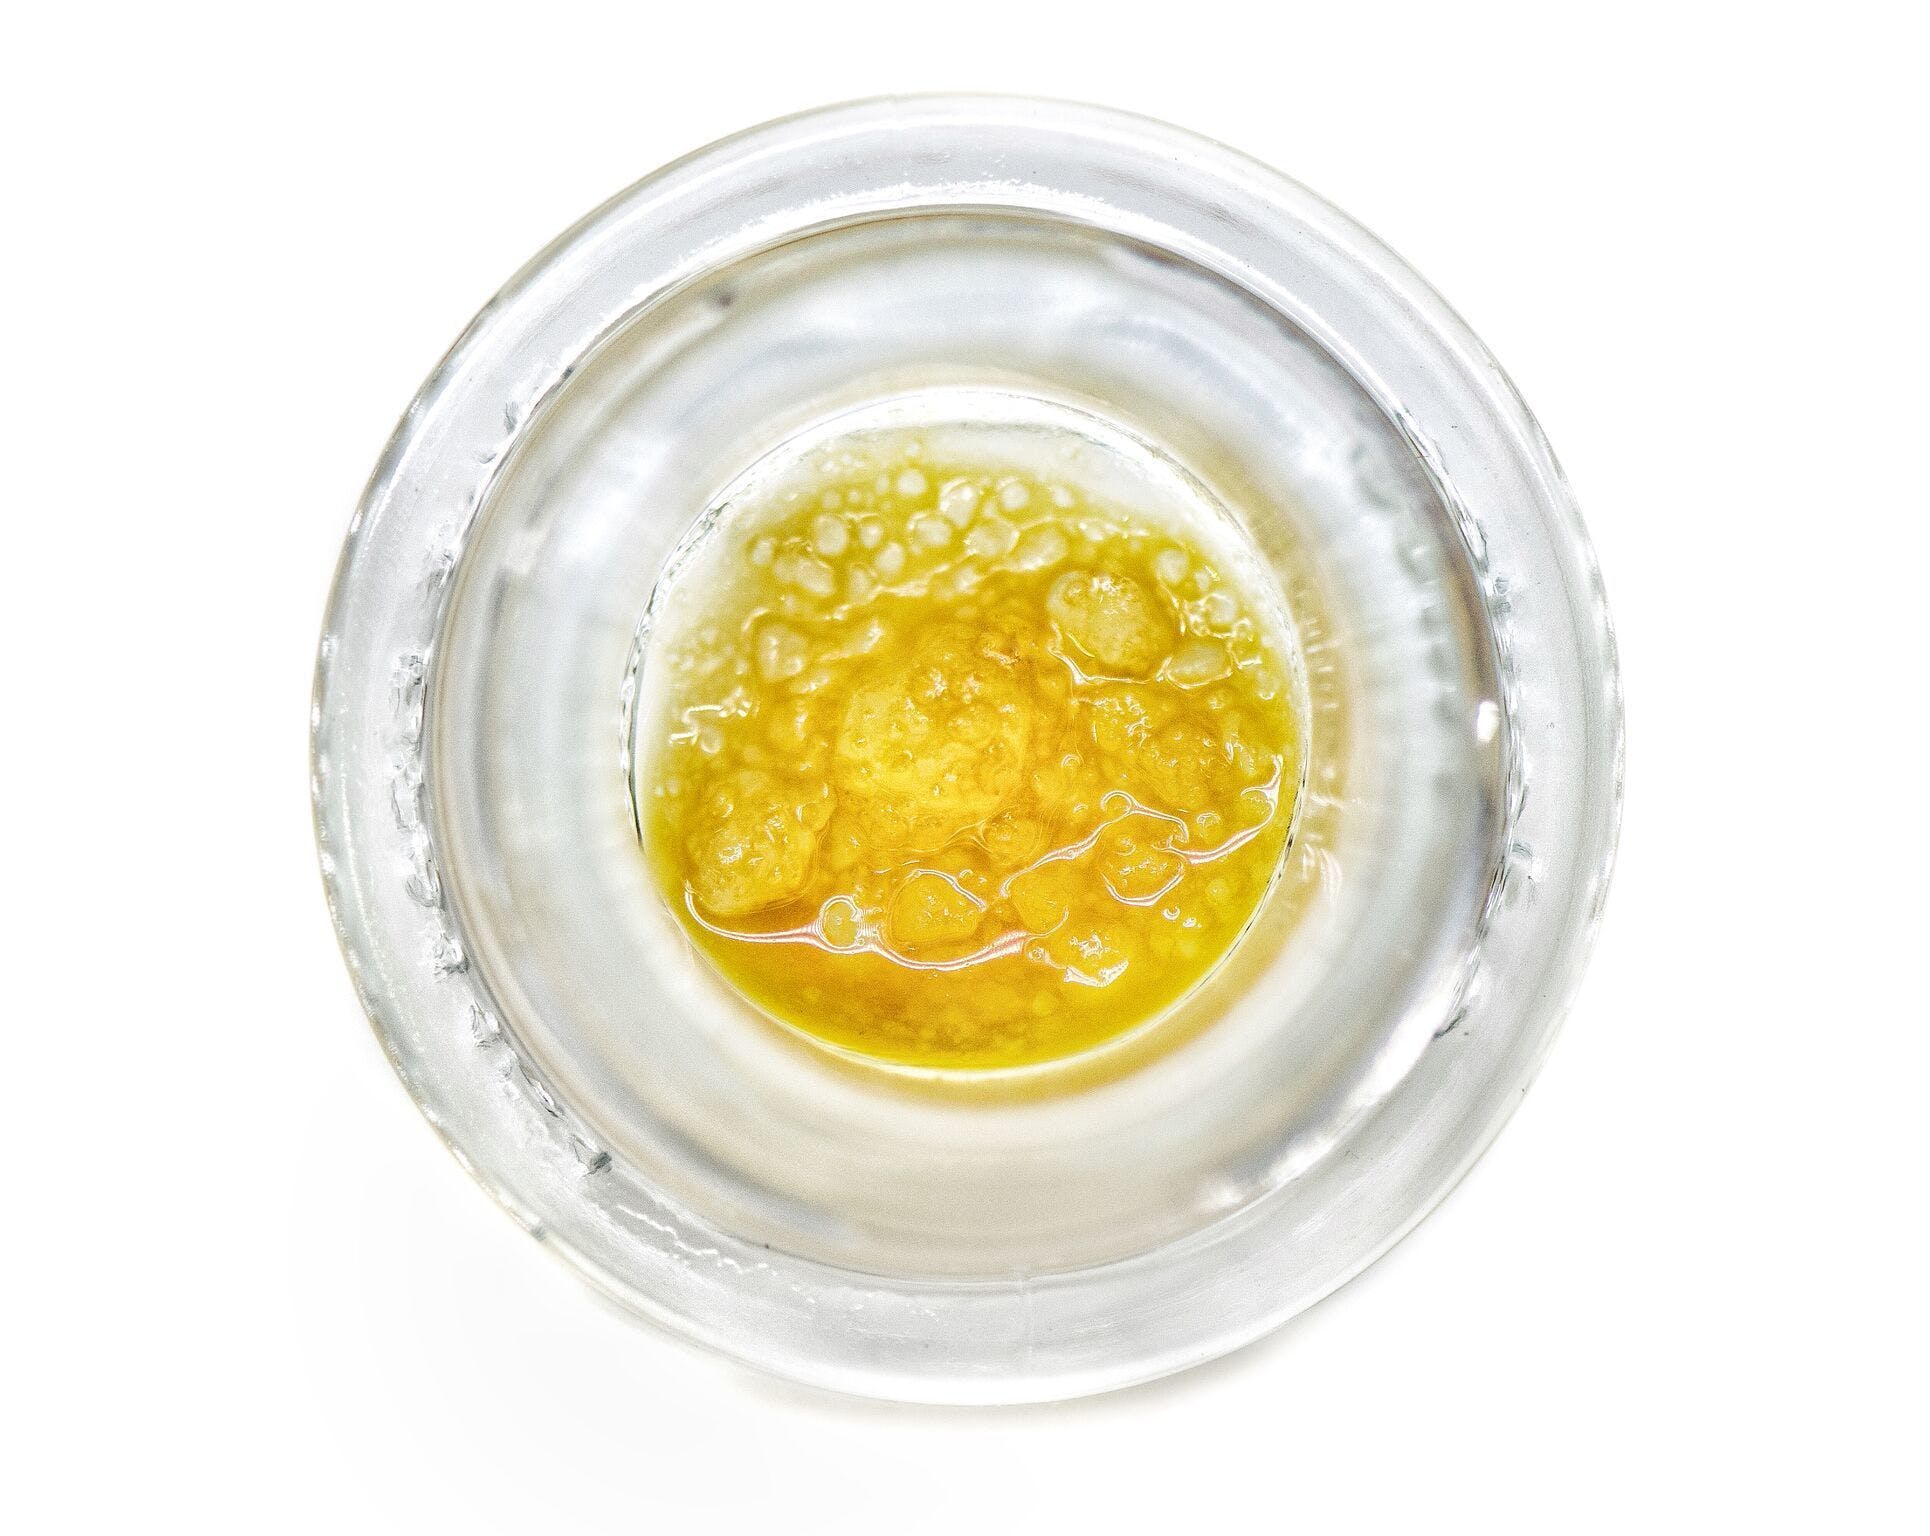 concentrate-ev-key-lime-cookies-terp-crystals-0-5g